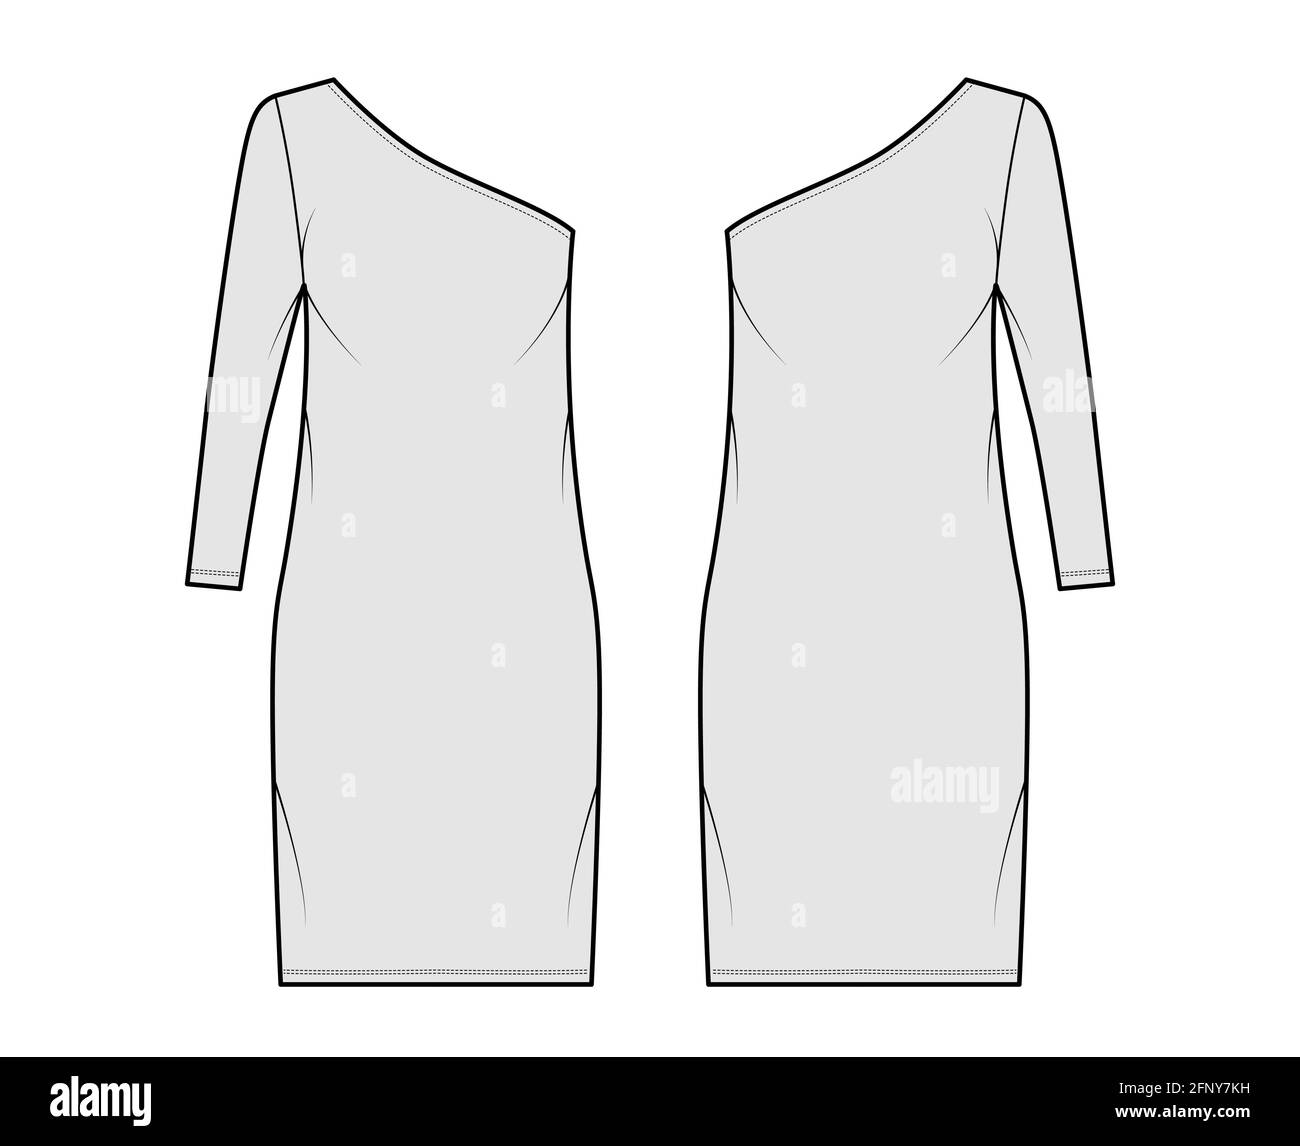 Dress one shoulder technical fashion illustration with long sleeve, oversized body, knee length pencil skirt. Flat apparel front, back, grey color style. Women, men unisex CAD mockup Stock Vector